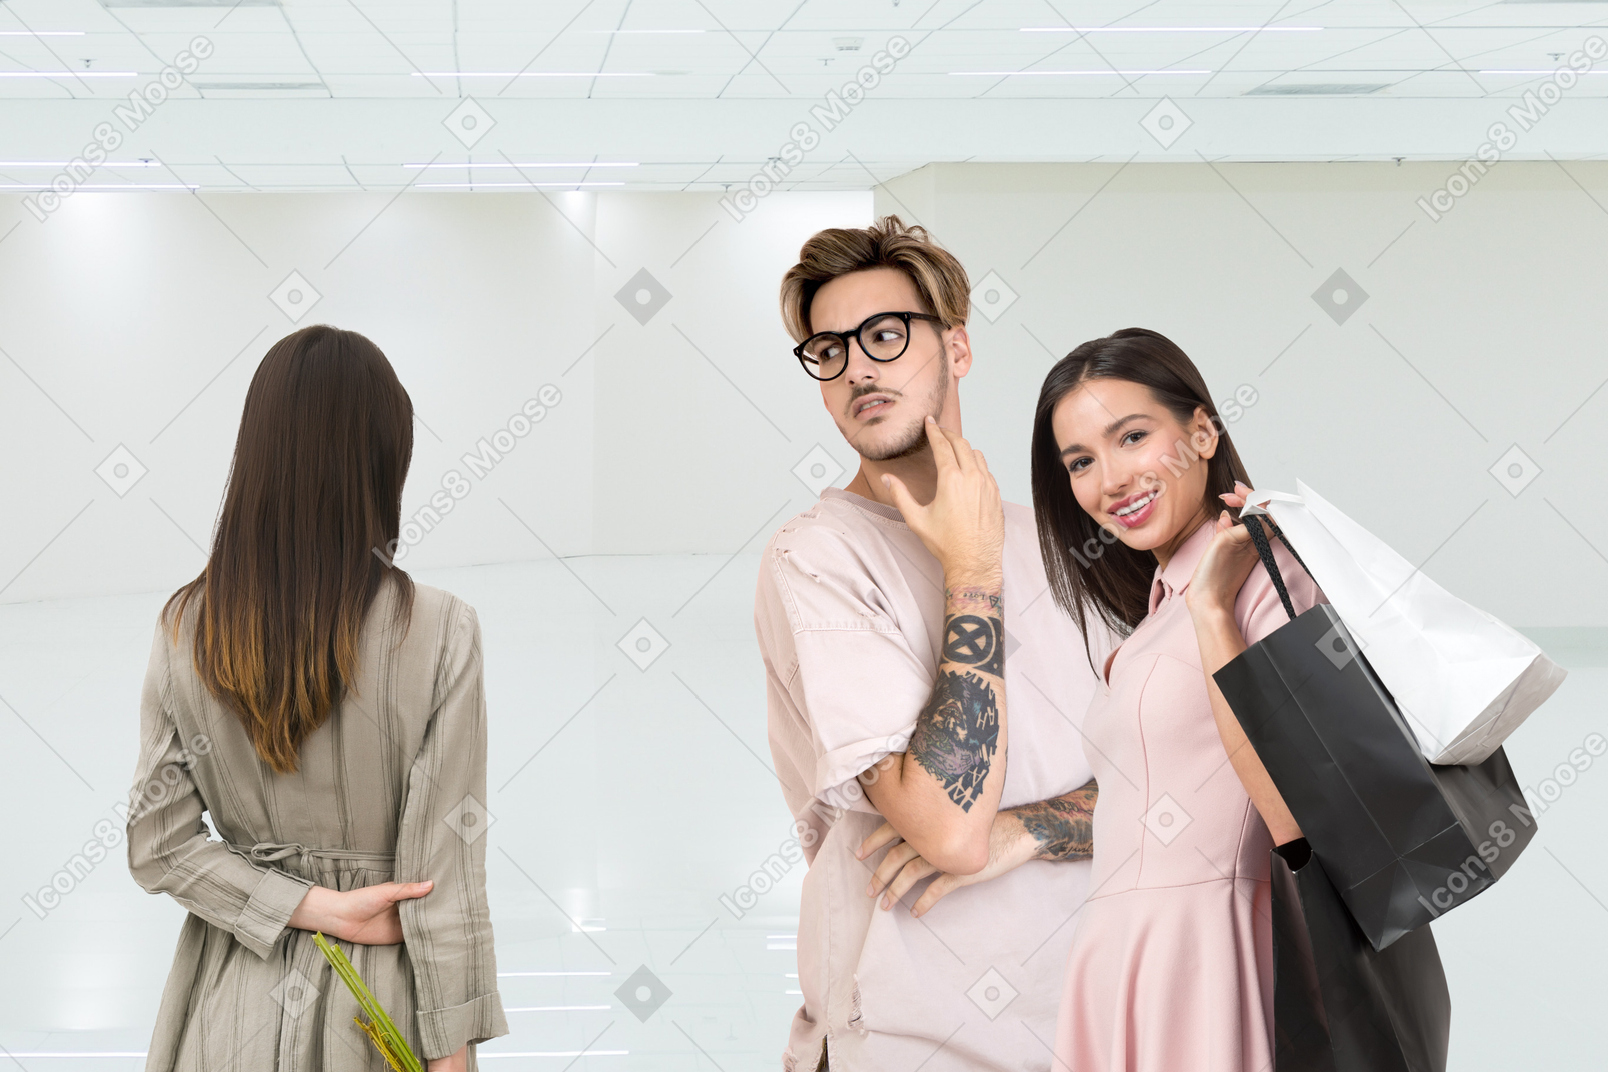 Young man staring at another woman while his girlfriend is not looking